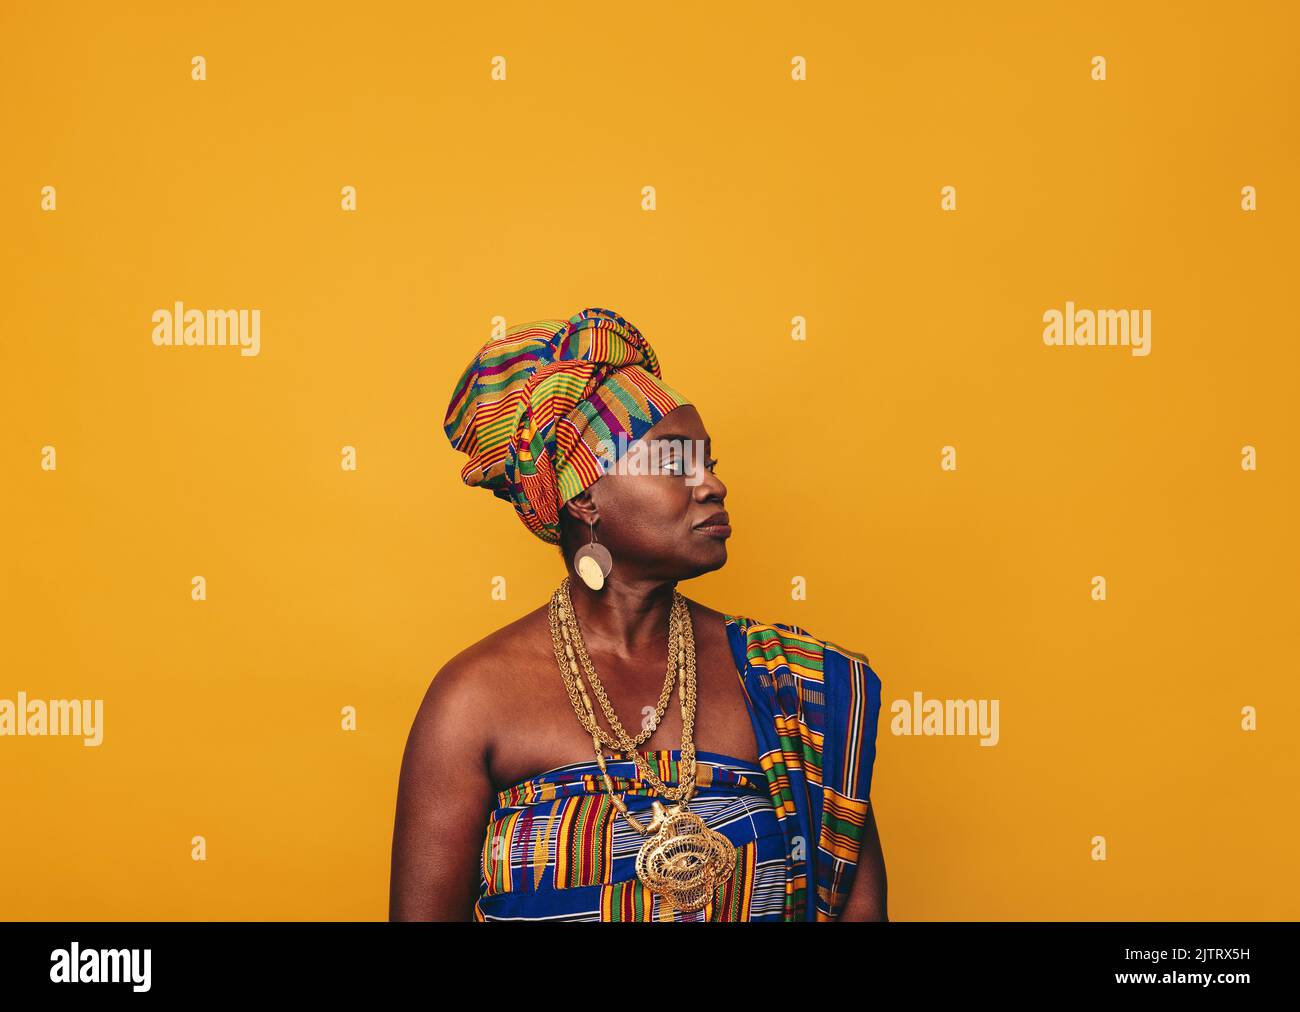 African woman wearing stylish traditional clothing against a yellow background. Mature black woman dressed in colourful Kente cloth and golden jewelle Stock Photo